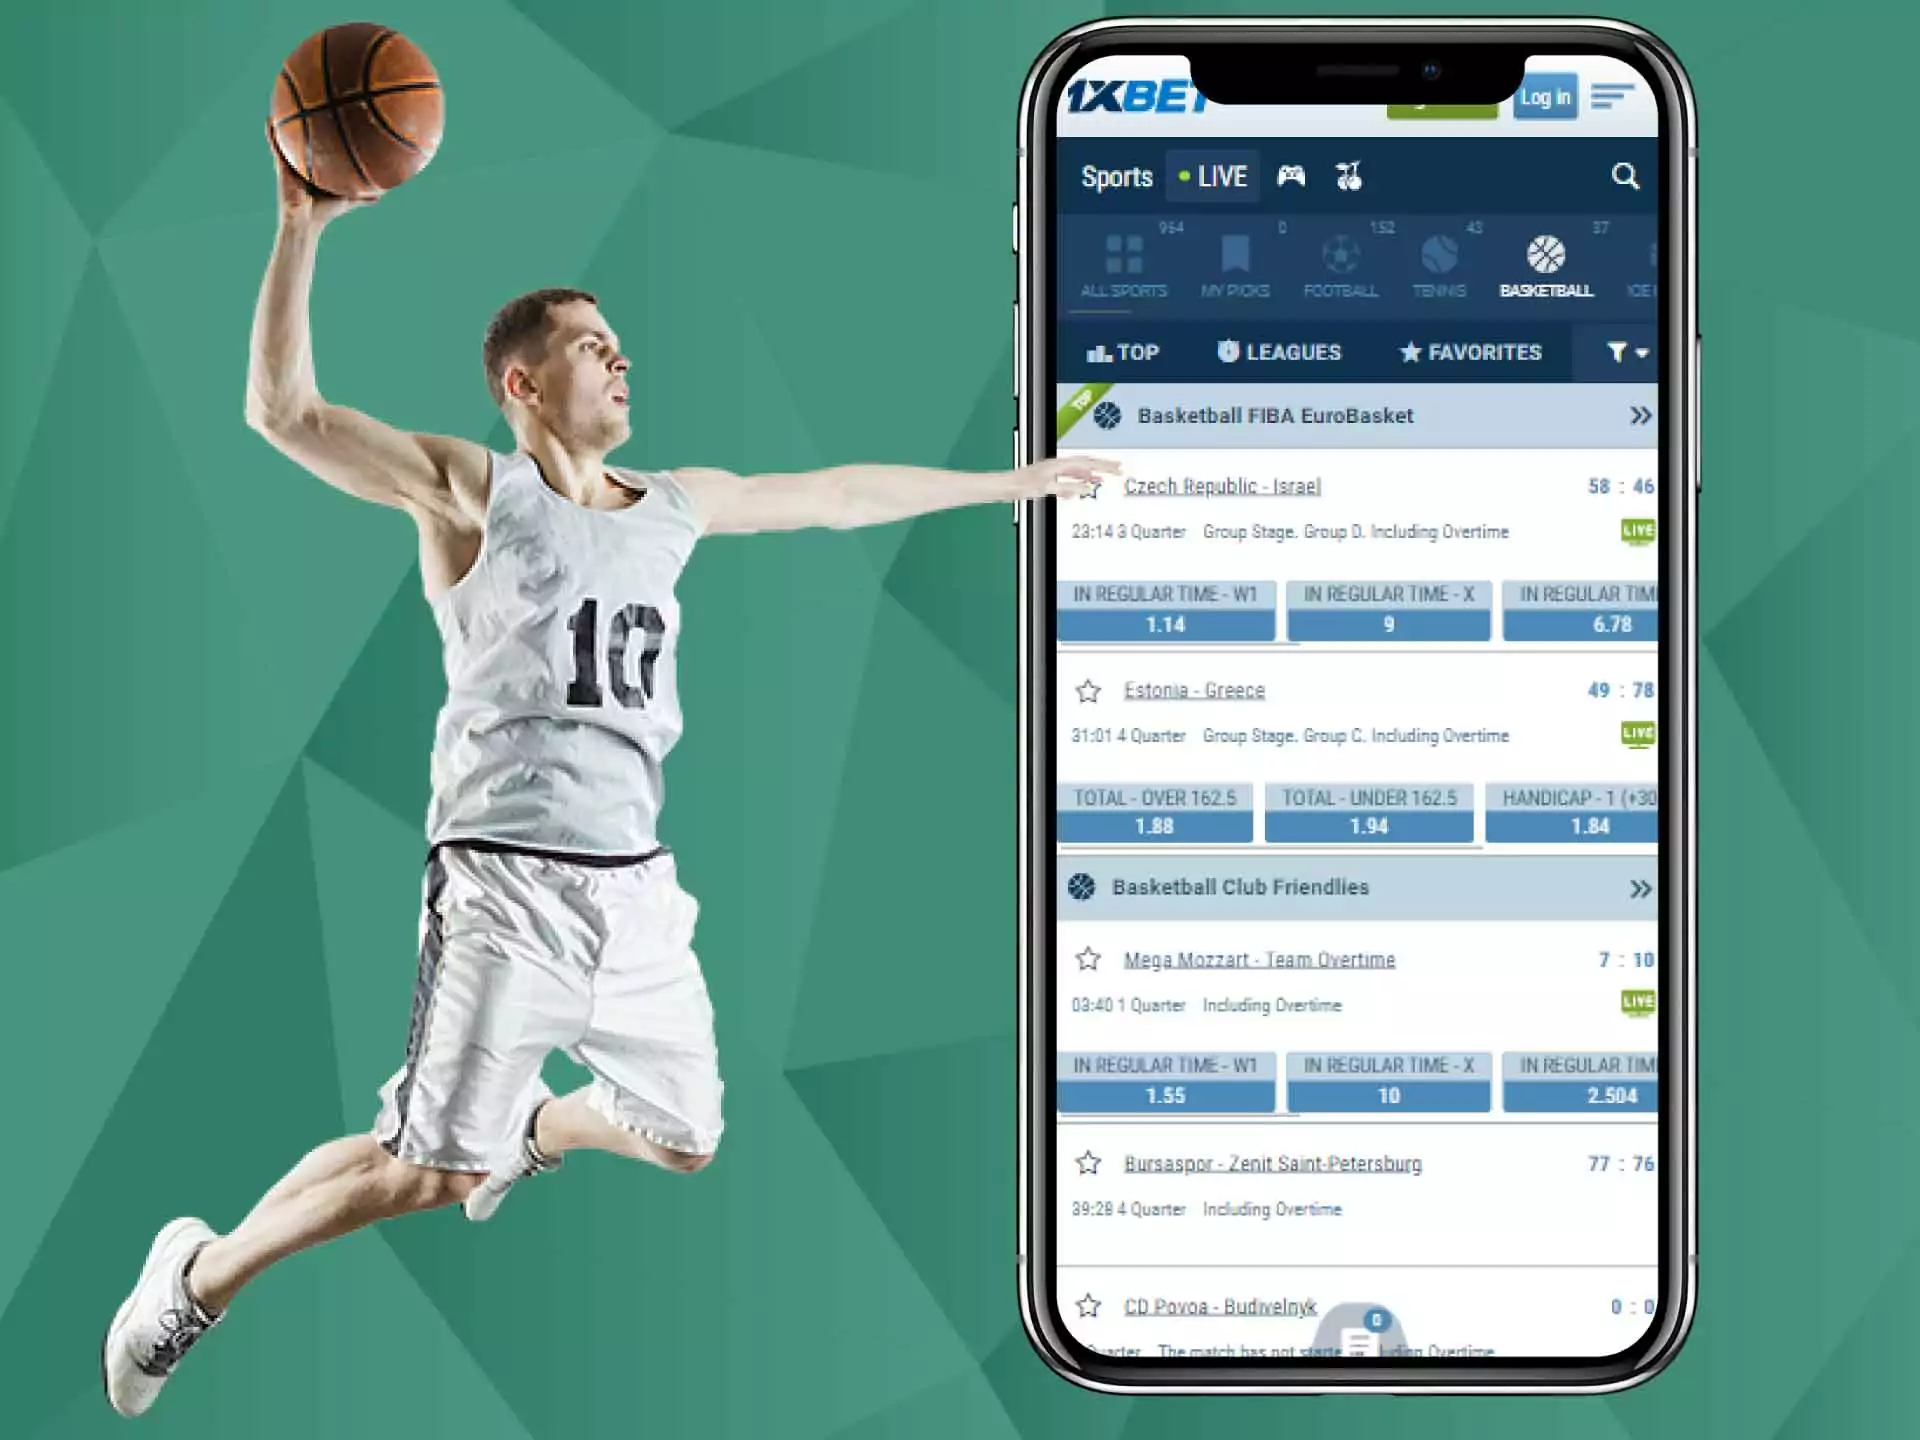 Basketball leagues are also available for betting at 1xBet.